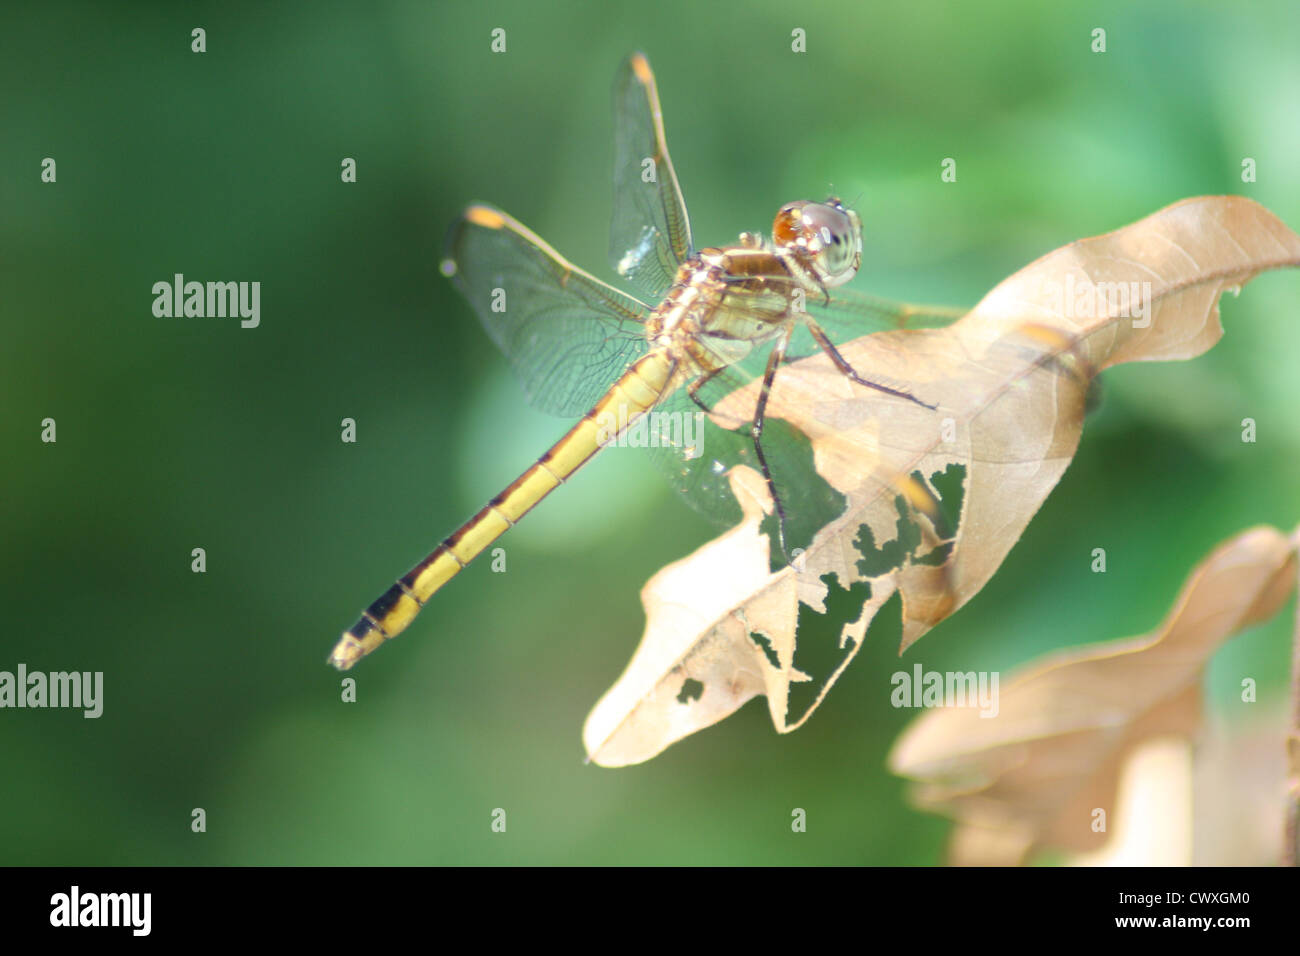 dragonfly photo green and brown dragonflies Stock Photo